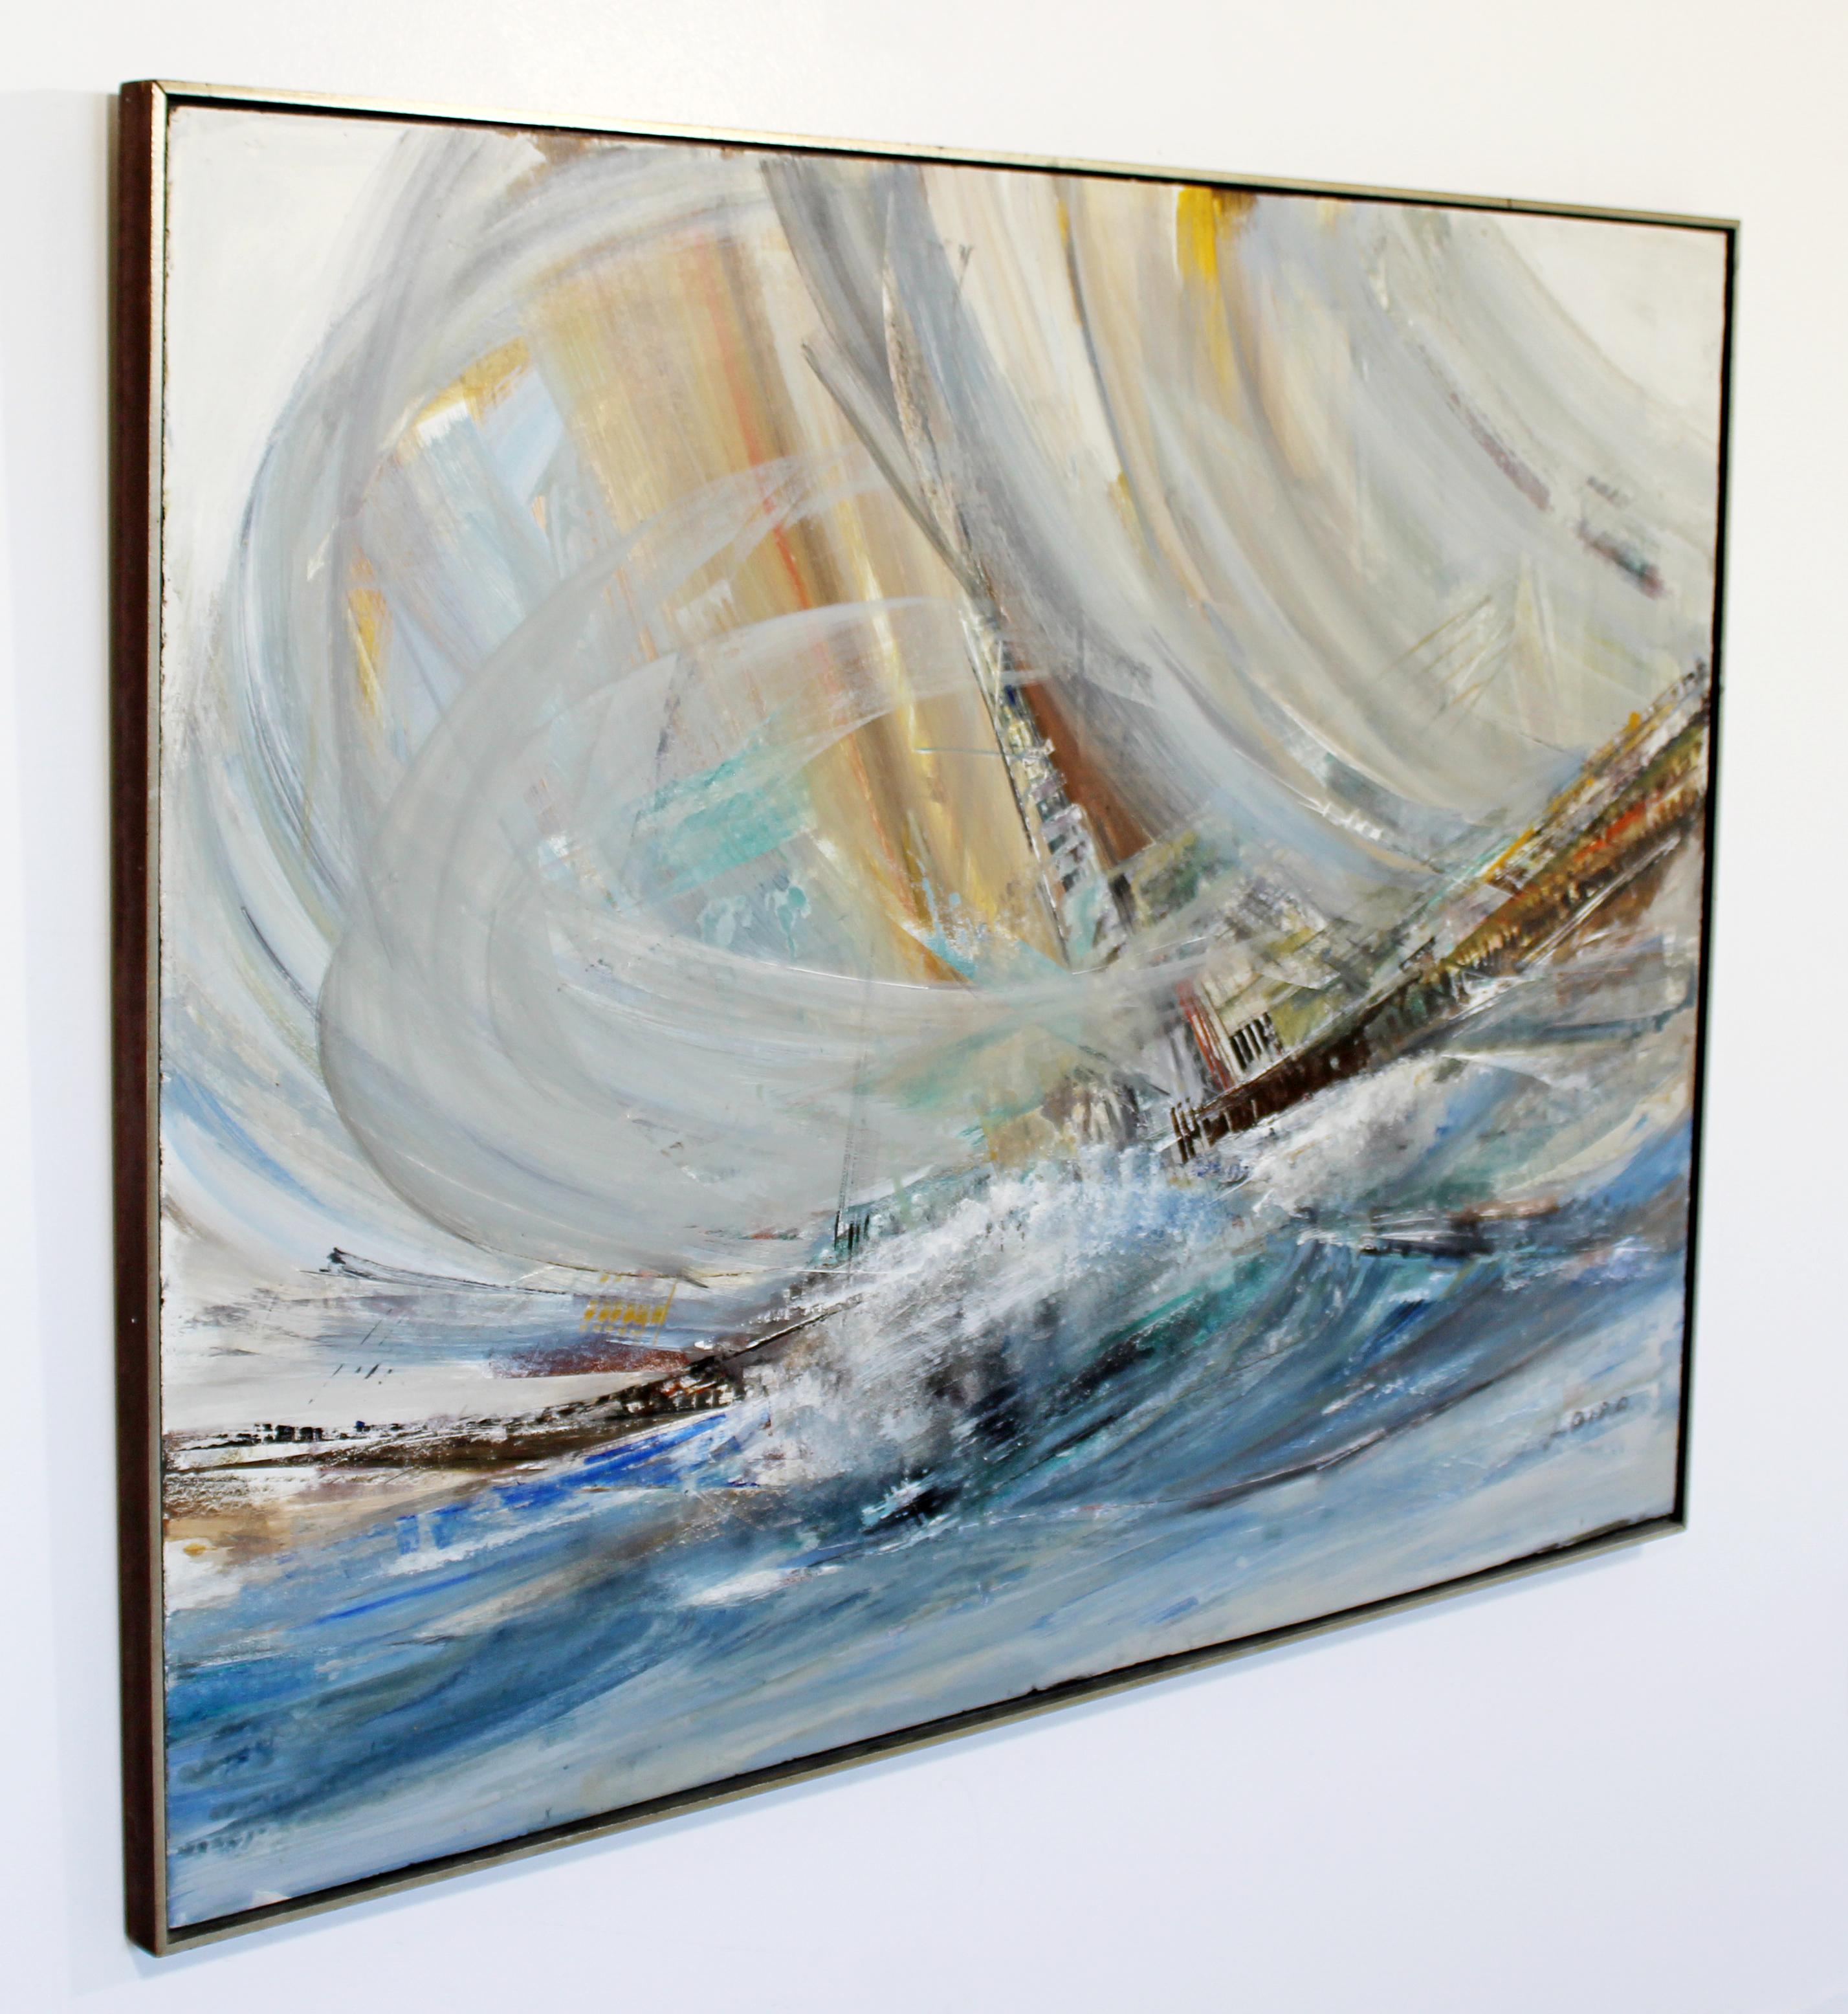 For your consideration is a mesmerizing, large, framed, abstract nautical acrylic impasto painting, signed by Laszlo Biro. In excellent condition. The dimensions are 49